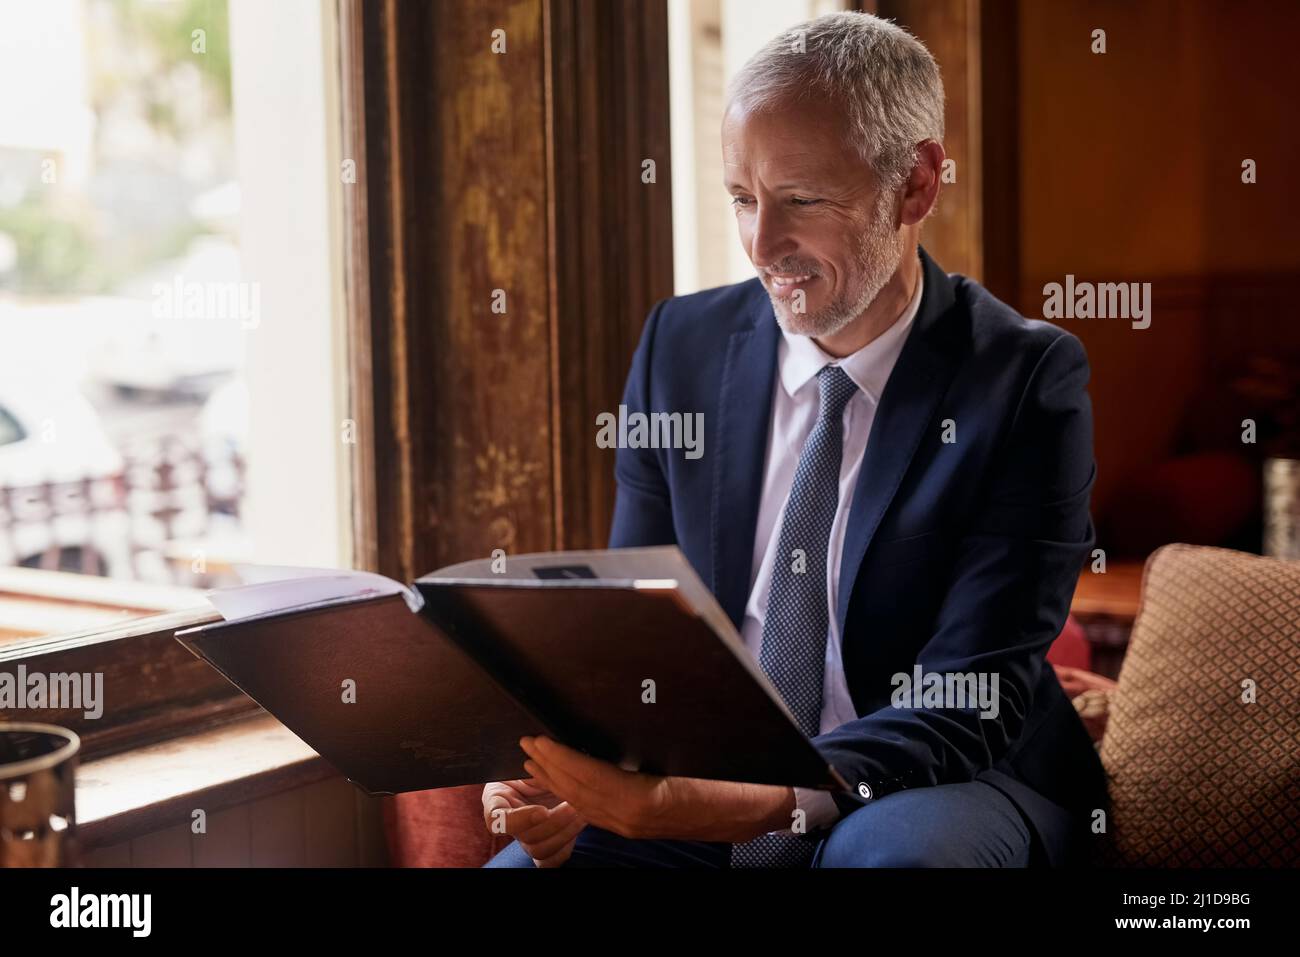 Whats on the menu for today. Shot of a well-dressed mature man reading a menu in a cafe after work. Stock Photo